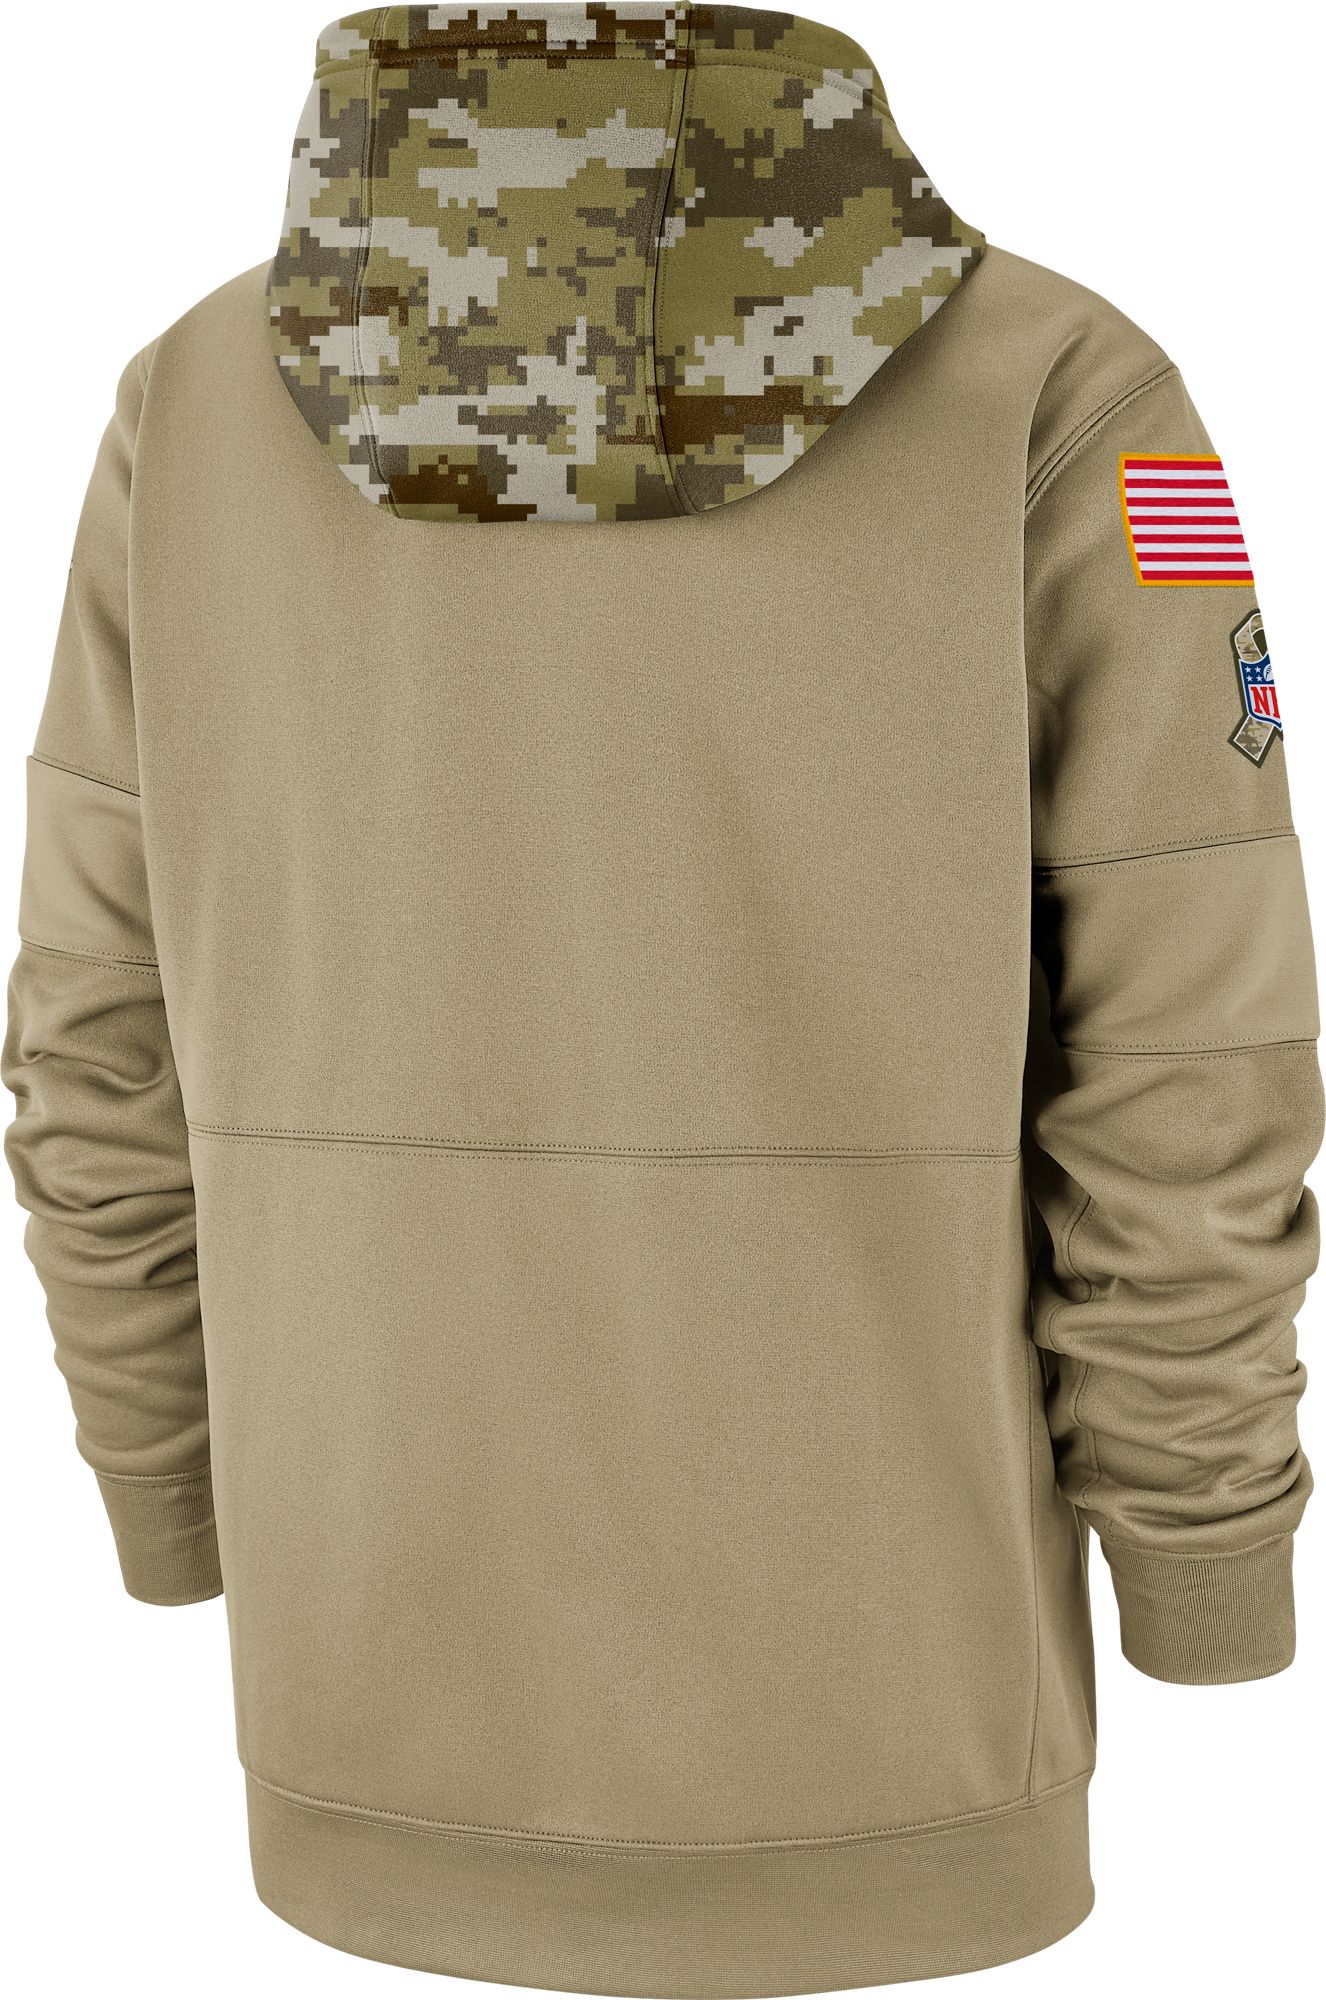 York Jets Therma-FIT Beige Camo Hoodie 